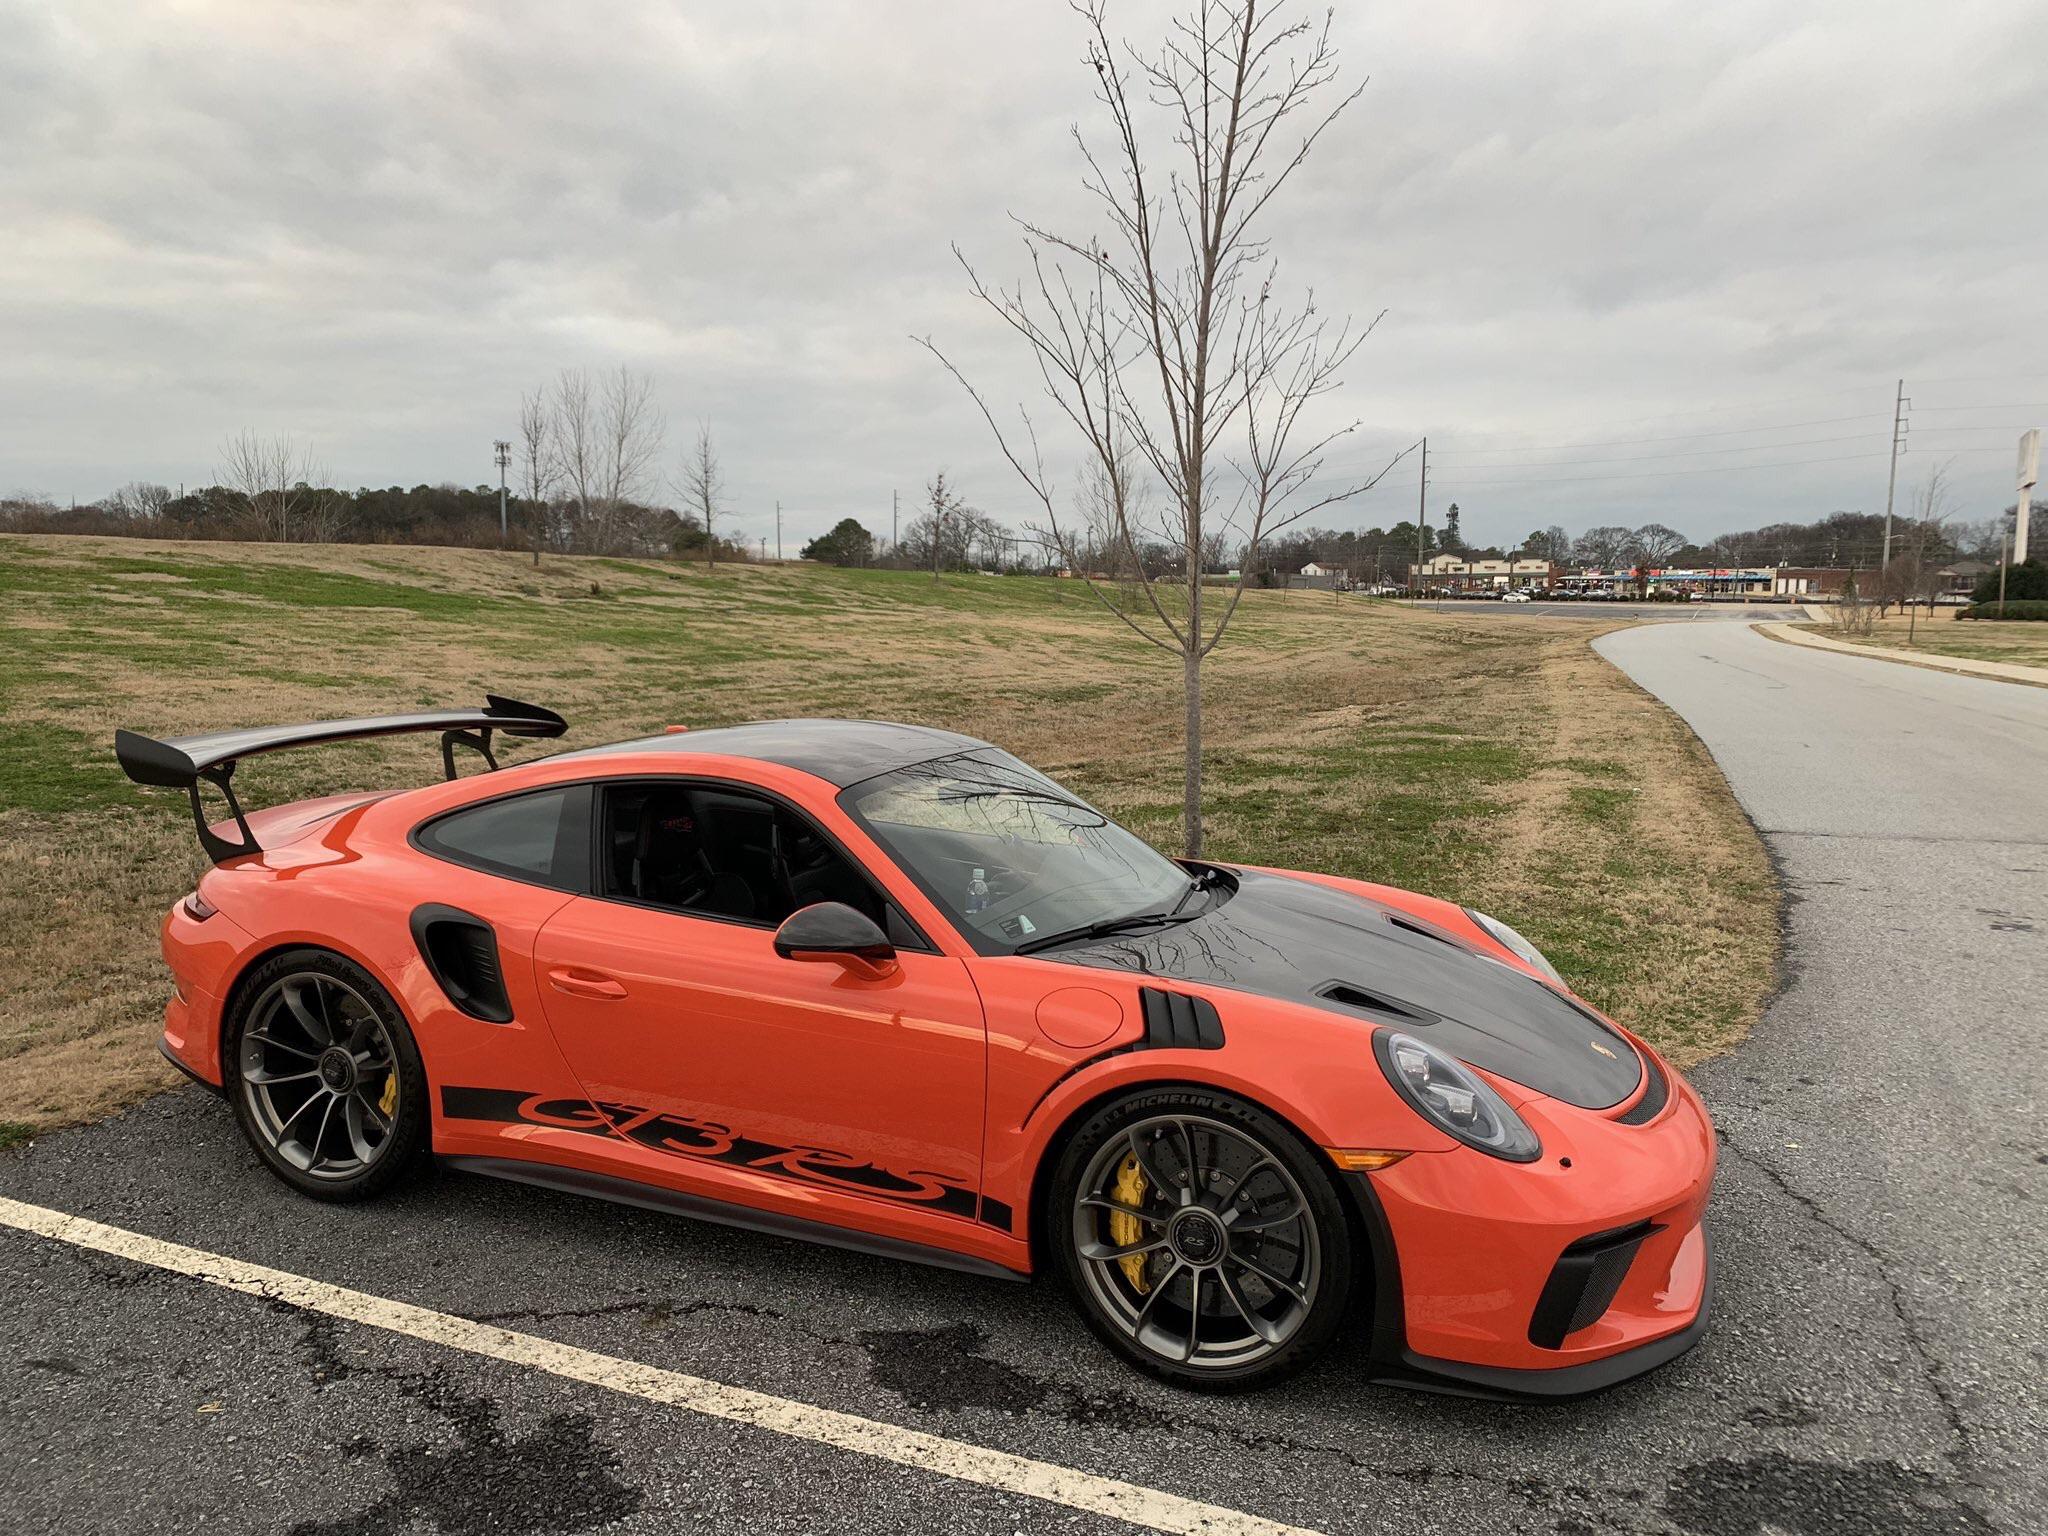 Adam LZ (Youtuber) picked up this GT3RS